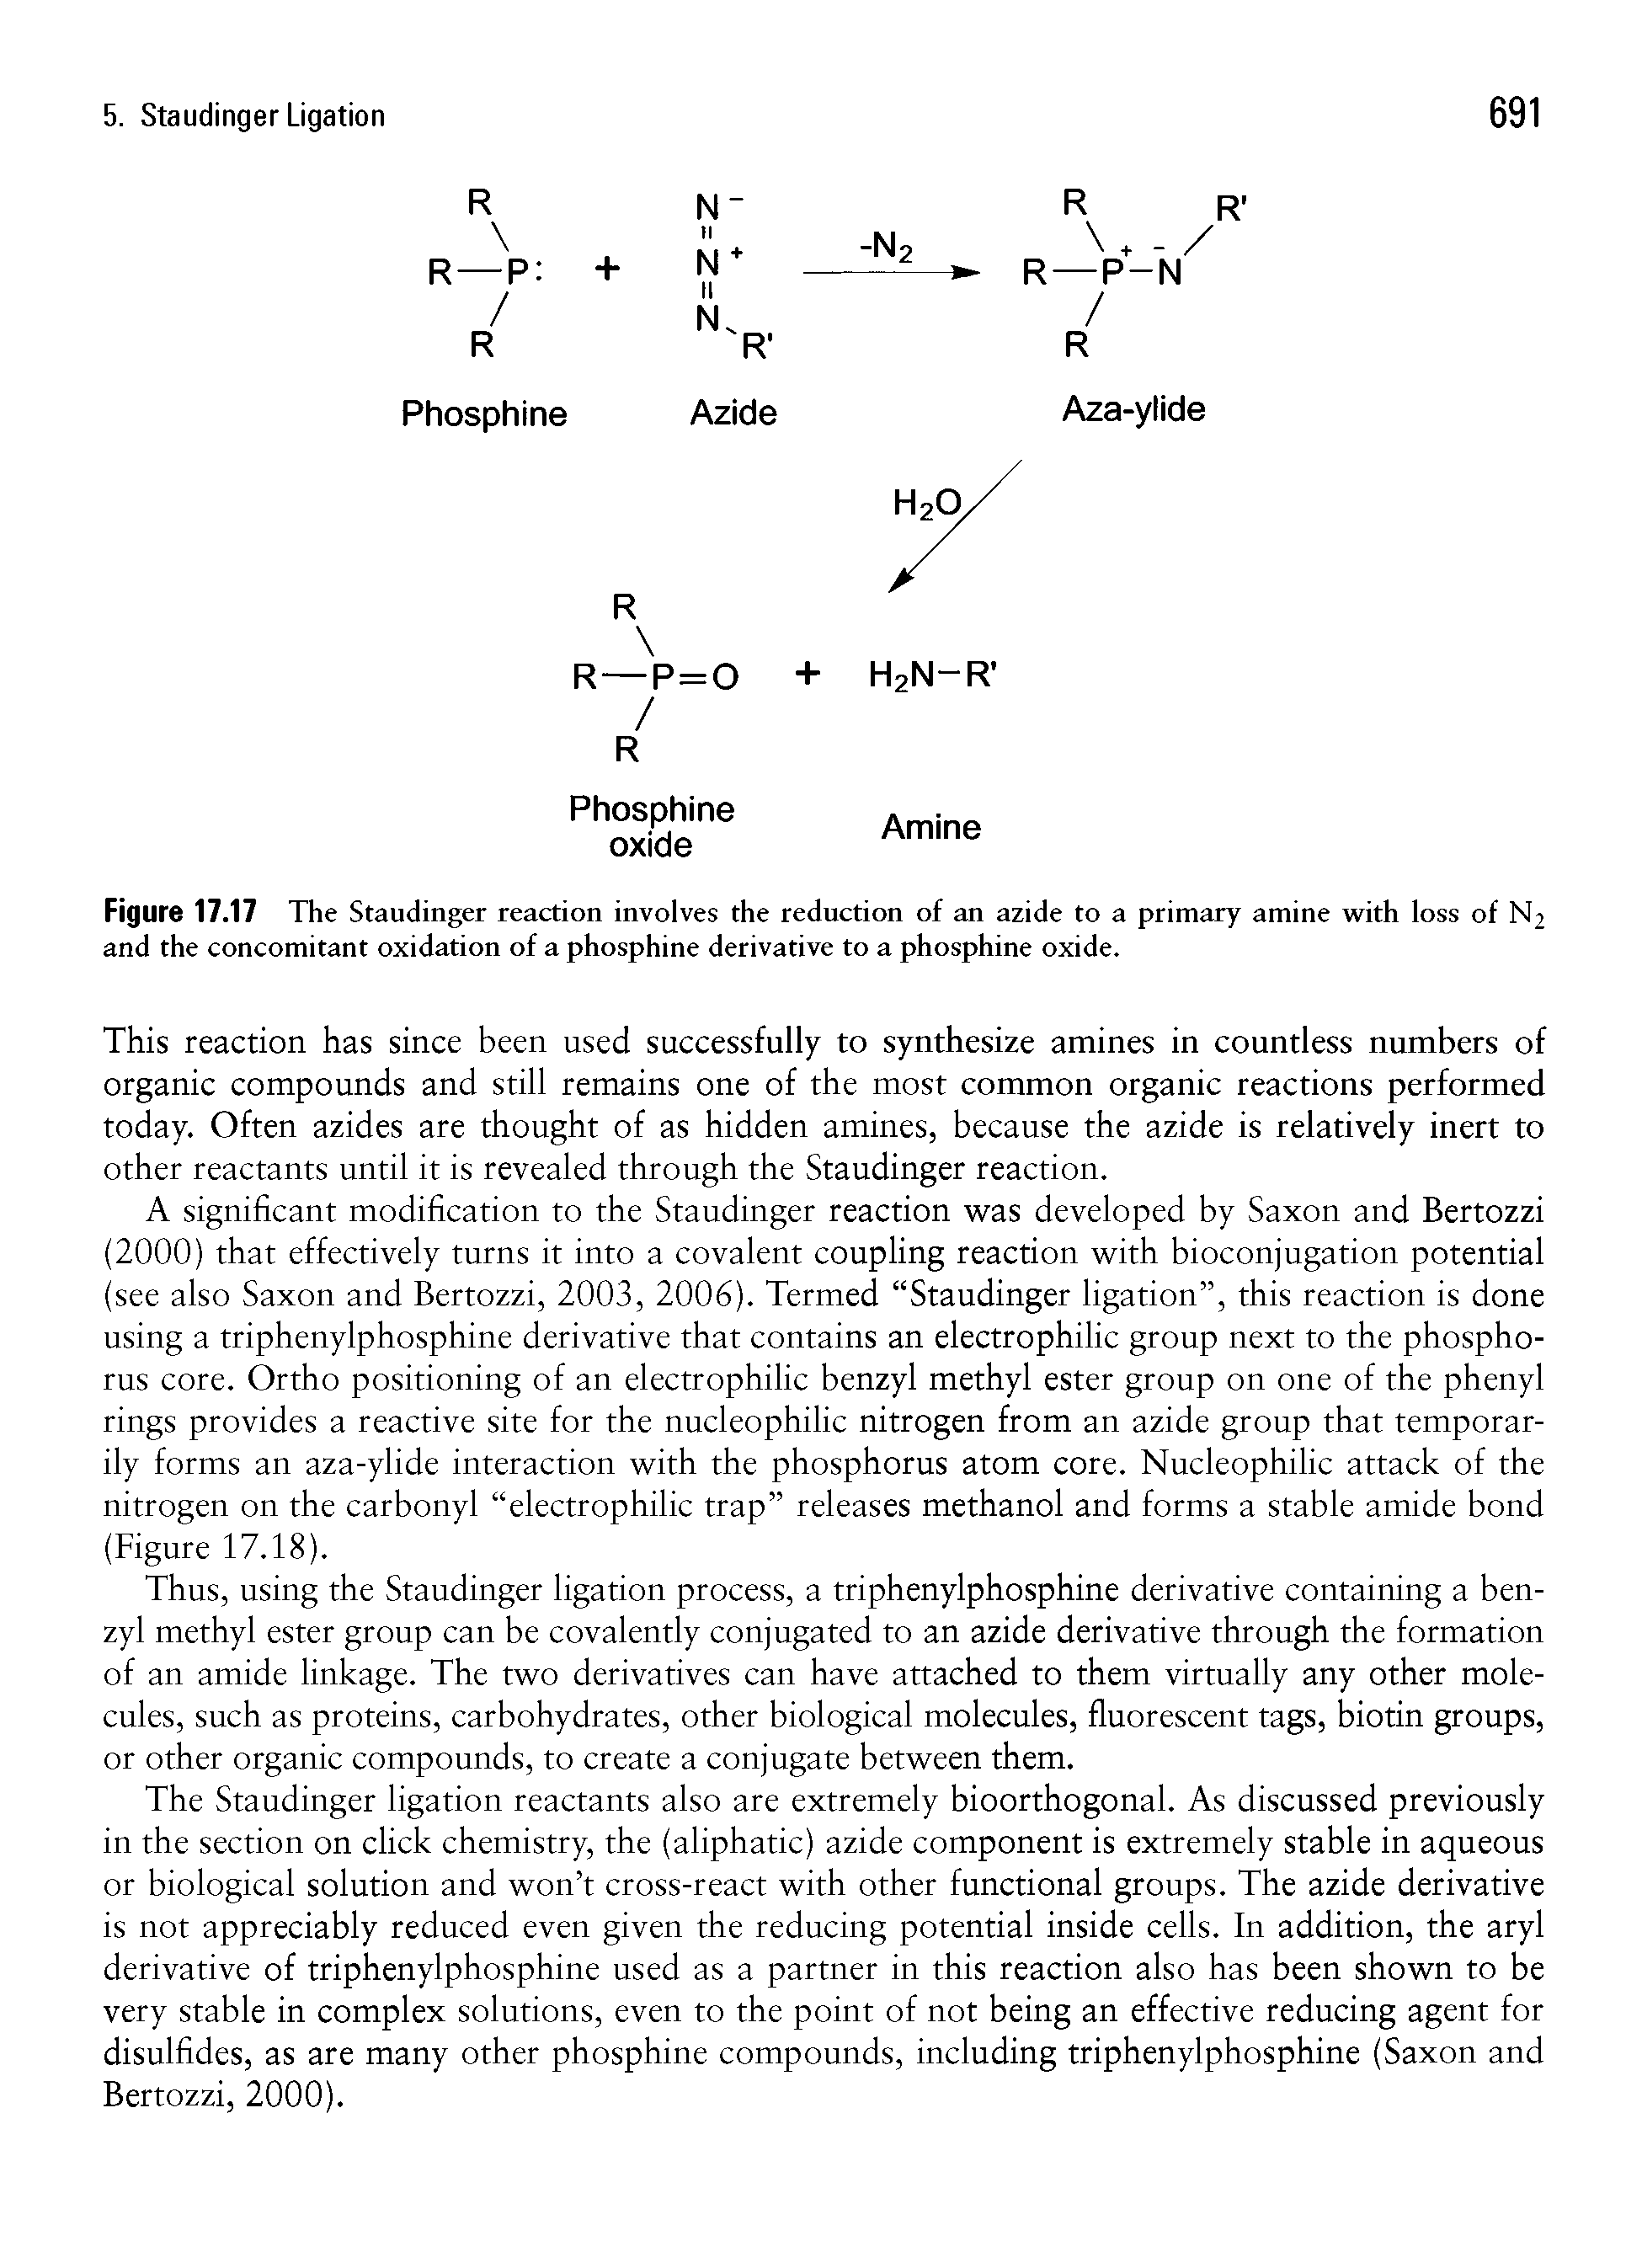 Figure 17.17 The Staudinger reaction involves the reduction of an azide to a primary amine with loss of N2 and the concomitant oxidation of a phosphine derivative to a phosphine oxide.